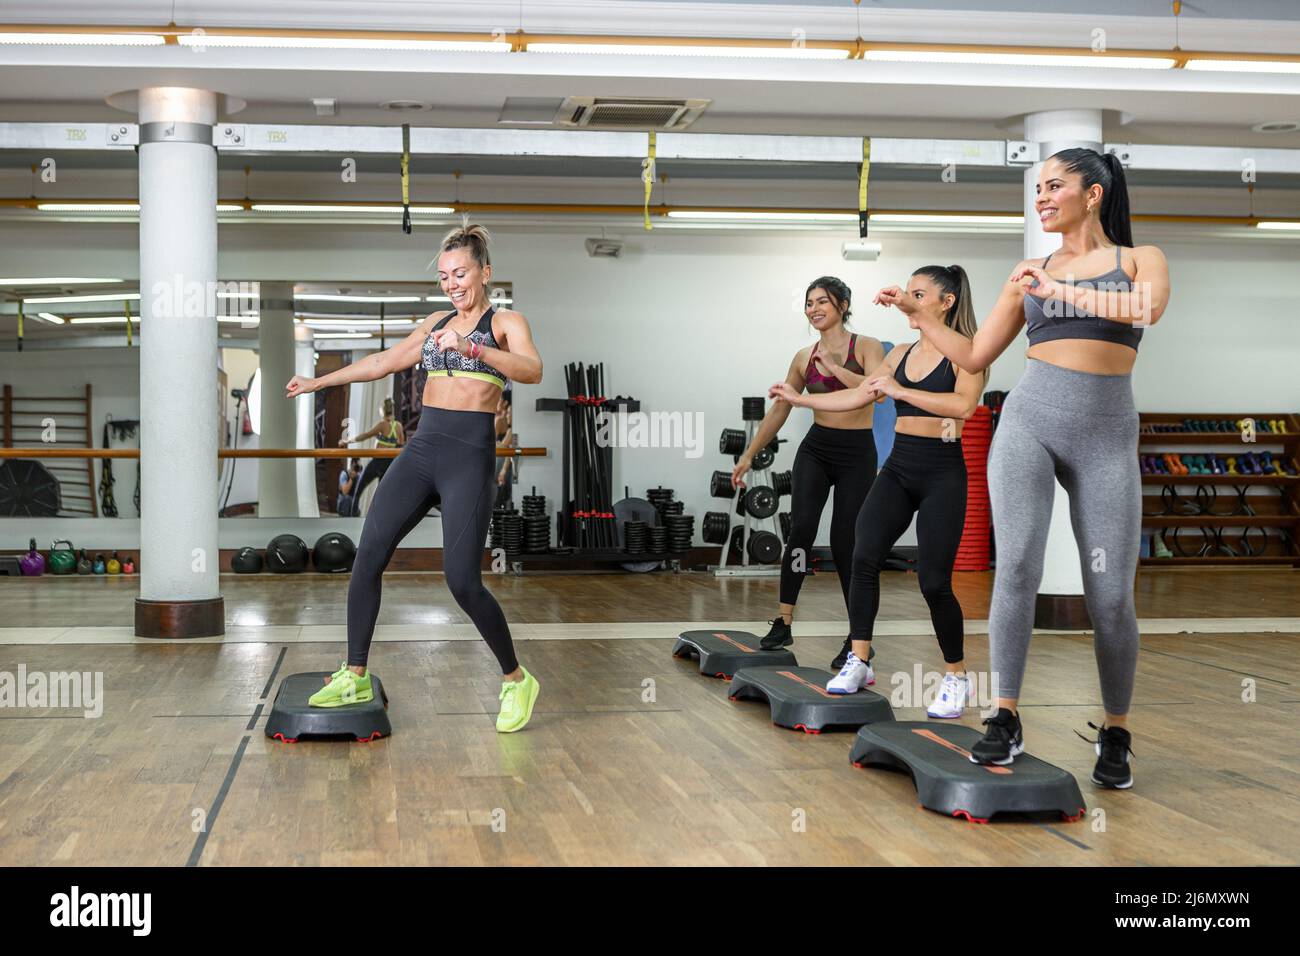 Group of gleeful female athletes and instructor smiling and dancing energetically on steppers during aerobic training in spacious modern gym. Stock Photo